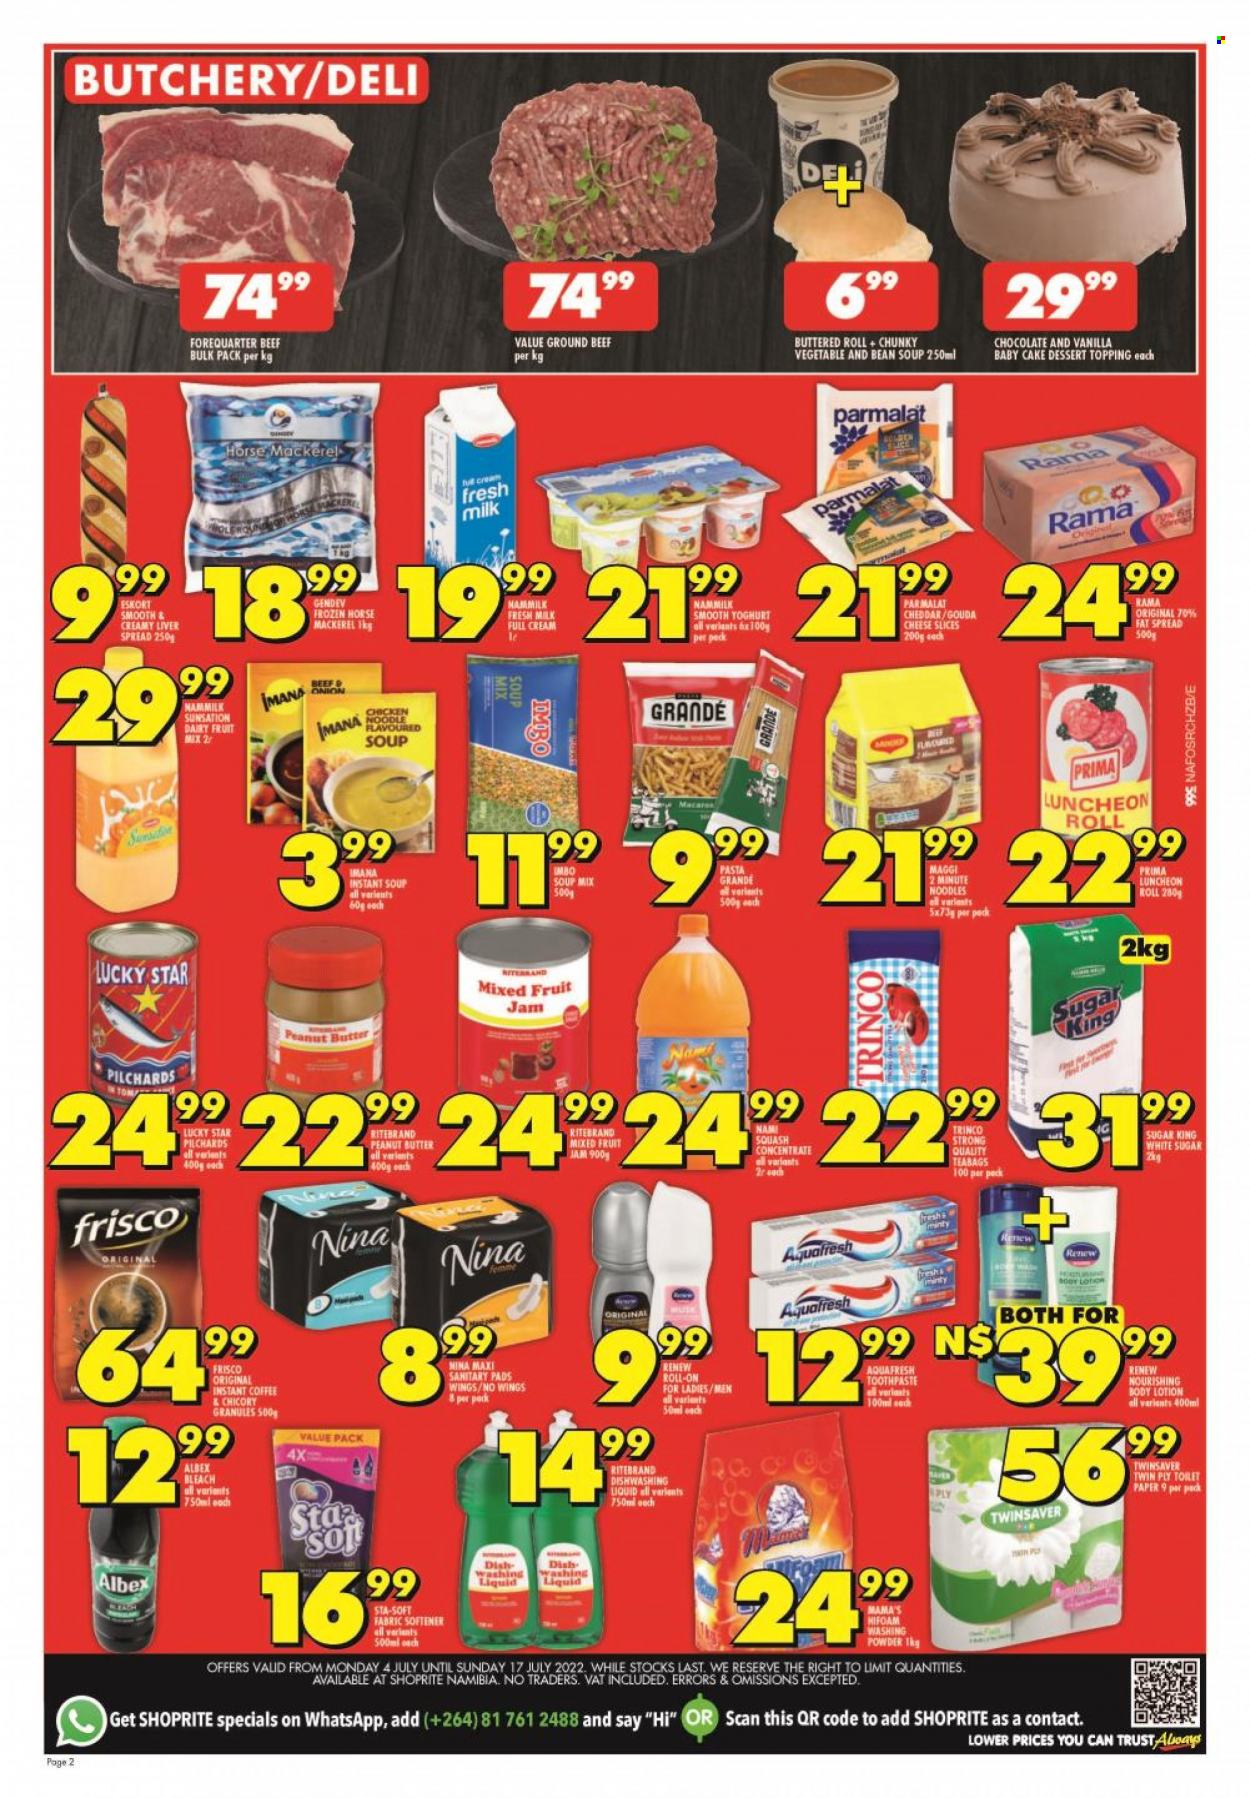 Shoprite catalogue  - 04/07/2022 - 17/07/2022 - Sales products - cake, mackerel, sardines, soup mix, condensed soup, soup, pasta, noodles, instant soup, Mama's, lunch meat, gouda, sliced cheese, cheddar, cheese, yoghurt, Parmalat, milk, fat spread, Rama, fruit mix, sugar, Maggi, topping, Pasta Grandé, jam, peanut butter, instant coffee, Frisco, beef meat, ground beef, toilet paper, bleach, fabric softener, laundry powder, dishwashing liquid, toothpaste, sanitary pads, body lotion. Page 2.